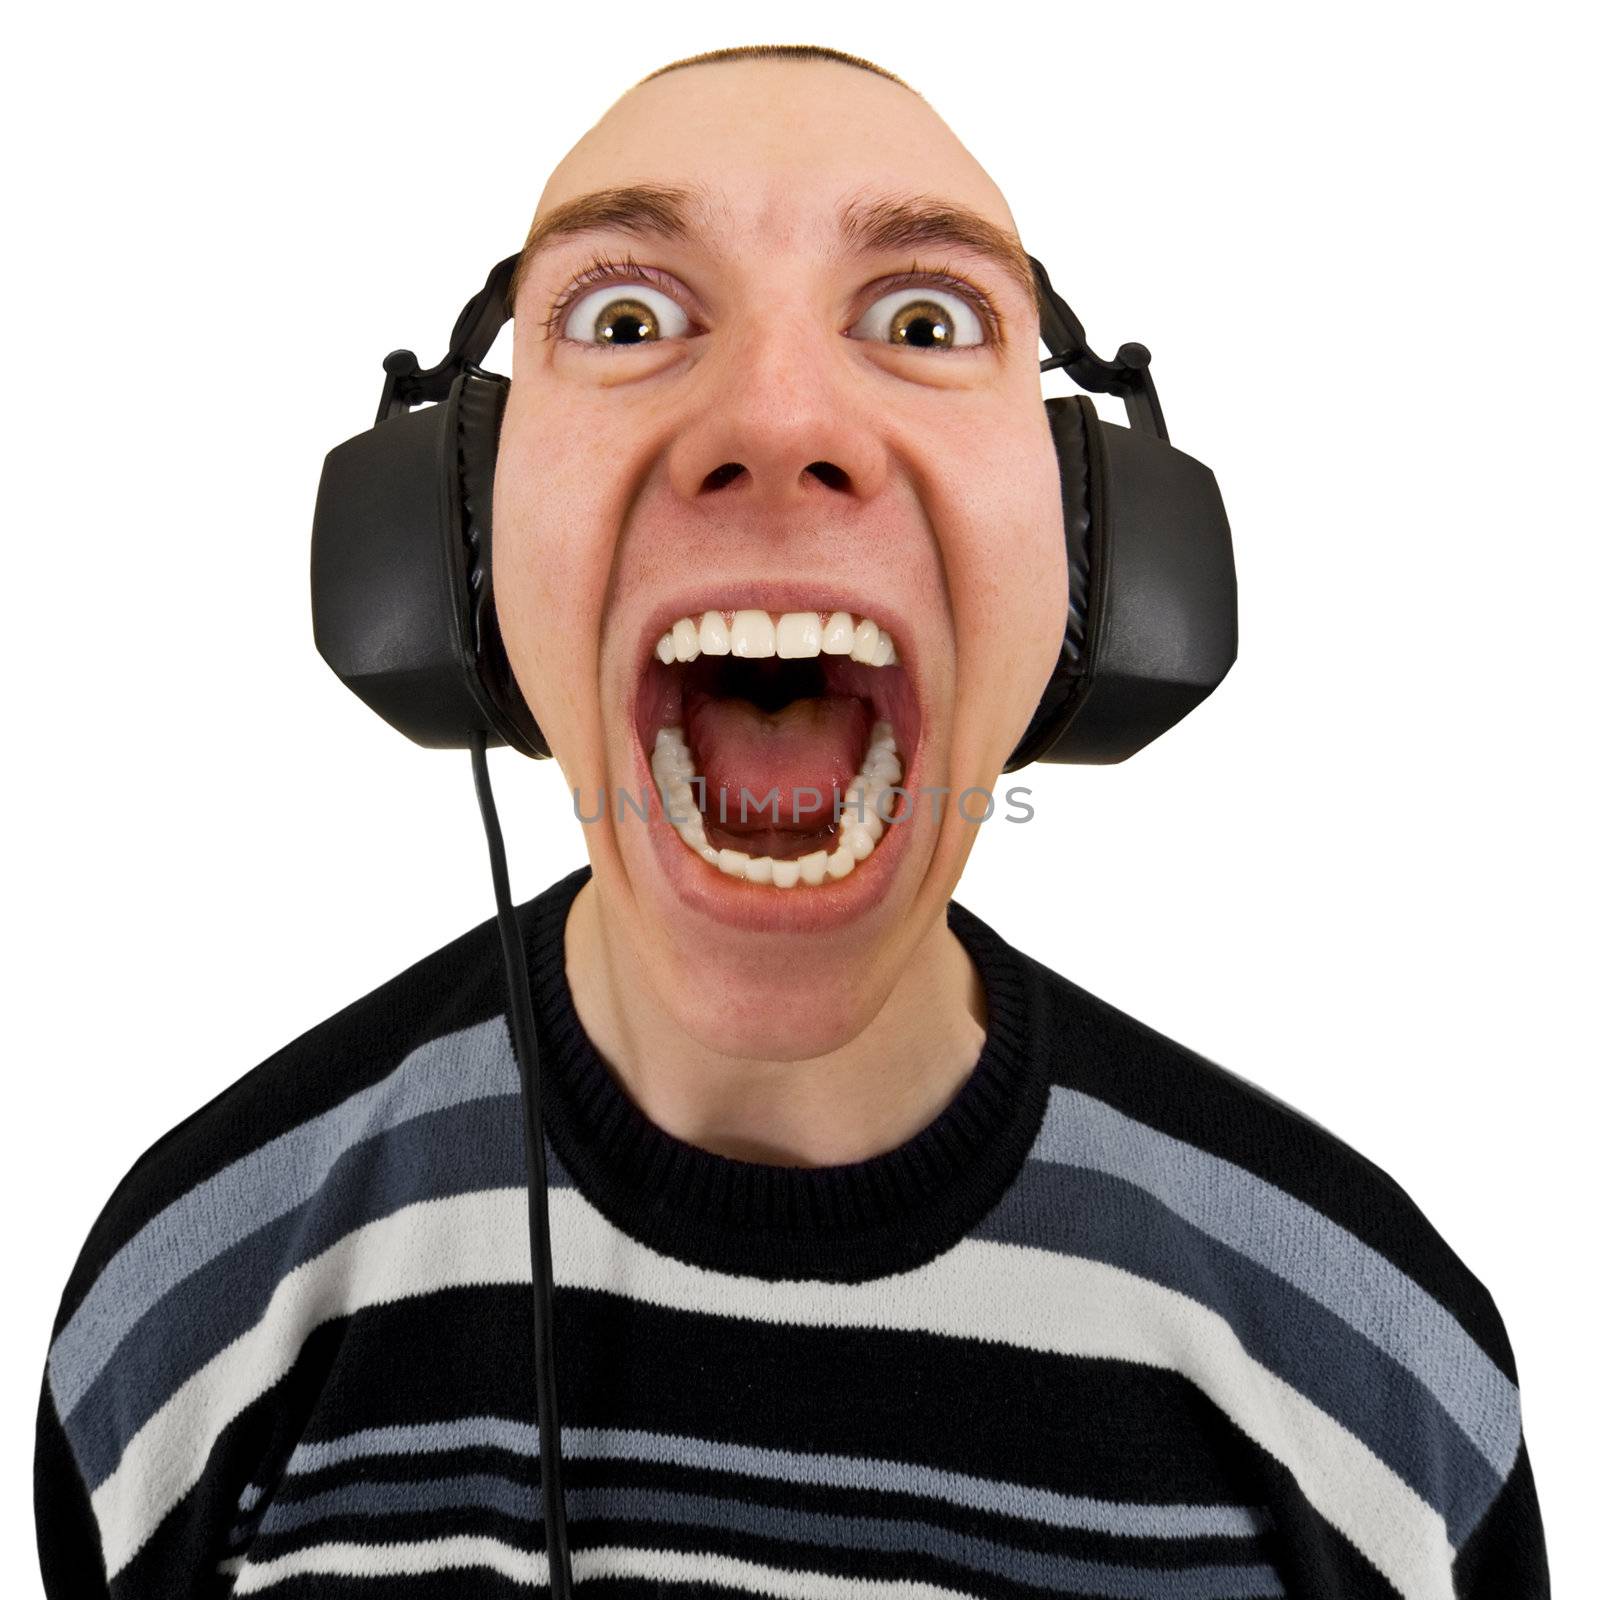 Funny man in the stereo headphones shouting isolated on a white background